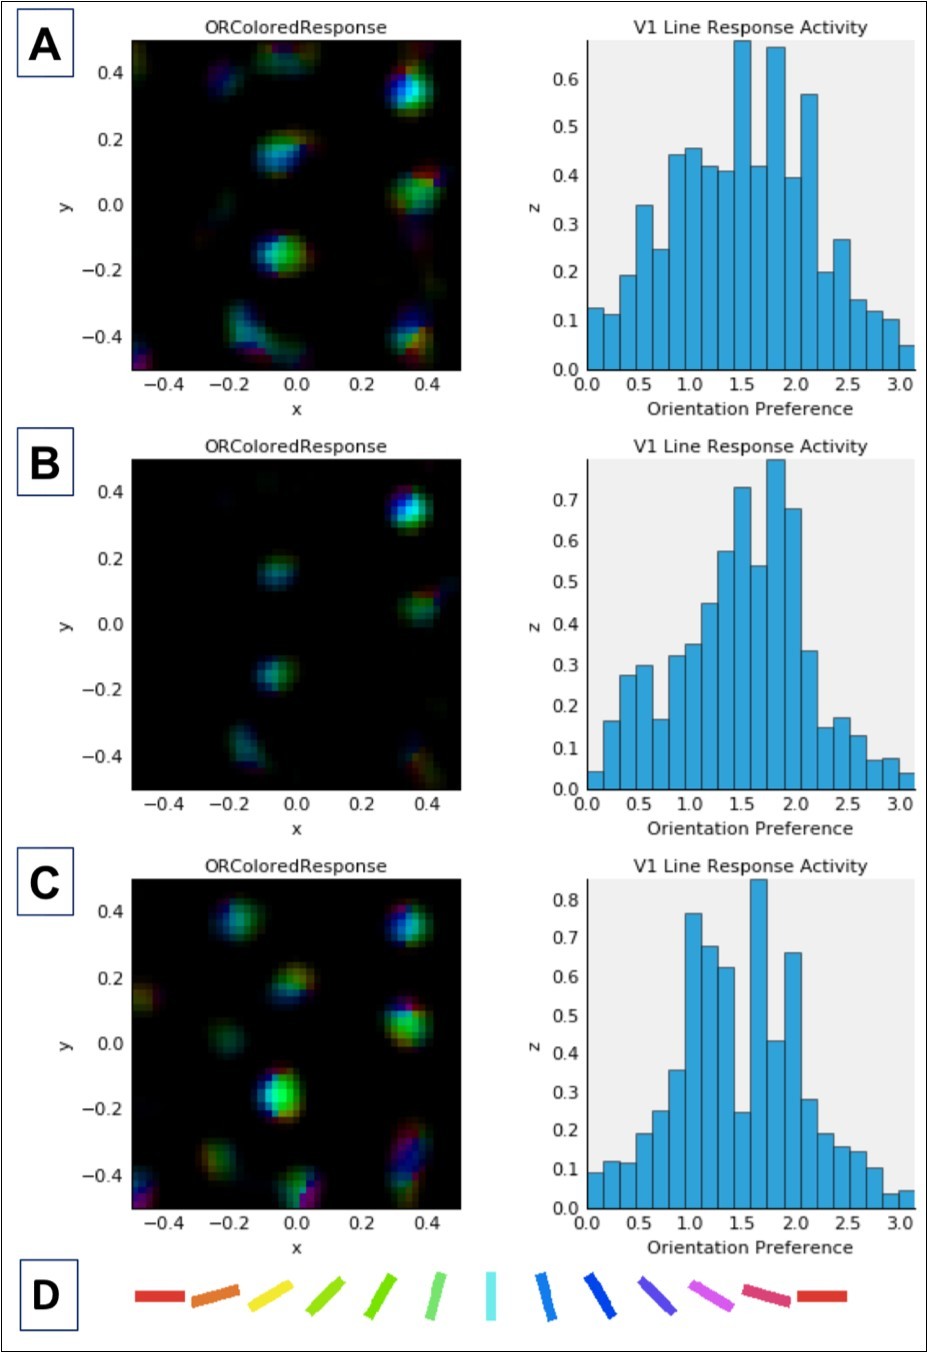  Combined activation and orientation preference maps (left column) and histograms showing activation of V1 neurons as a function of cell orientation preference (on x-axis, in radians) (right column). Data in both columns reflect activation in response to a single presentation of the LSF sine grating stimulus at 80% contrast (see Figure 2) after normal or abnormal model V1 development (see below). Each color in the maps in the left column corresponds to selectivity for the orientation denoted by the corresponding color in the key (D) at the bottom of this figure. Brightness corresponds to the firing rate of the neuron at a given location in the V1 sheet, which is retinotopic with respect to the LSF stimulus shown in Figure 2. In the histograms in the right column, the expected distribution peak for vertically oriented stimuli (see Figure 2) is π/2 or ~1.57 radians. A: Data for unmodified model after 20,000 iterations (same as in top row, Figure 4).  B: Data after 10,000 normal development trials followed by 10,000 trials adapting to 10% increased V1 lateral excitation. This model is associated with the highest CV of all contrast ramp models (see Table 1). Note that the peak of the OR tuning histogram is not at the preferred orientation, which may account for some of the excess variability, in addition to the large drop from the peak to the tails, which is also asymmetrical. C: Data after 10,000 normal development trials, followed by implementation of 10% increased V1 lateral excitation, and then by immediate presentation of the 1000-stimulus sequence. Note the high level of excitation in this model (before generalized inhibition effects arise). This model demonstrates the highest mean activation of all contrast ramp models (note change in Y axis values relative to other models), and the highest SD, but not the highest CV or excess kurtosis. The latter can be observed both in the smaller tails in the histogram, as well as in the blue-green coloring in the activation map       indicating that the excess activation was for orientation selective cells signaling vertical or near-vertical orientations. As with the model data in Row 2, the peak of the OR histogram is again not at preferred orientation, but is close to it (and activation in other model neurons is roughly symmetrical around it) with little activity at the tails, and less activity at the tails compared to the model after 20,000 developmental iterations. This increased drop in activation away from the peak can account for a portion of increased CV in this model.